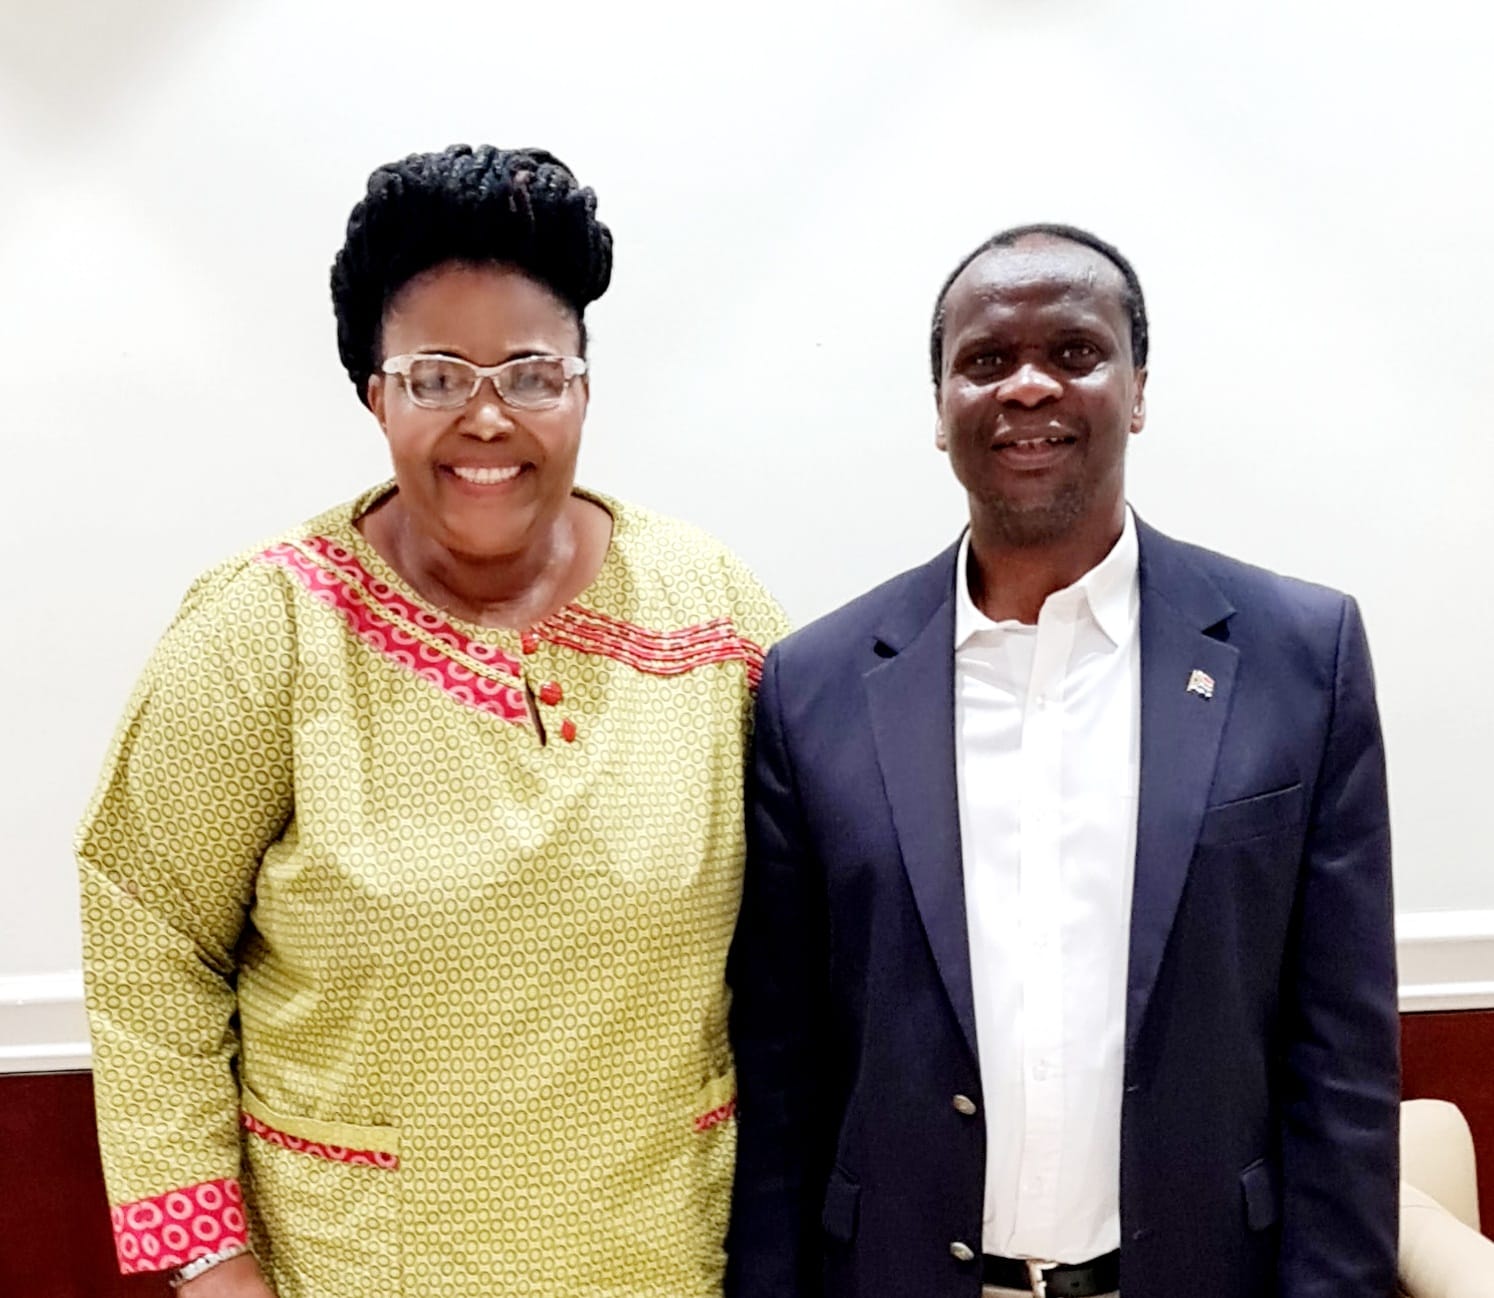 On_Sunday_30_January 2022_Ambassador_Makaya_during_a_courtesy_and_consultation_with Honourable_Ms_Pemmy_Majodina_the_Chief_Whip_of_the_National_Assembly_of the Republic_of_South_Africa_and_who_is_also_part_of_the_delegation_of_the_members_of_the_Pan_African_Parliament_Southern_Africa Caucus